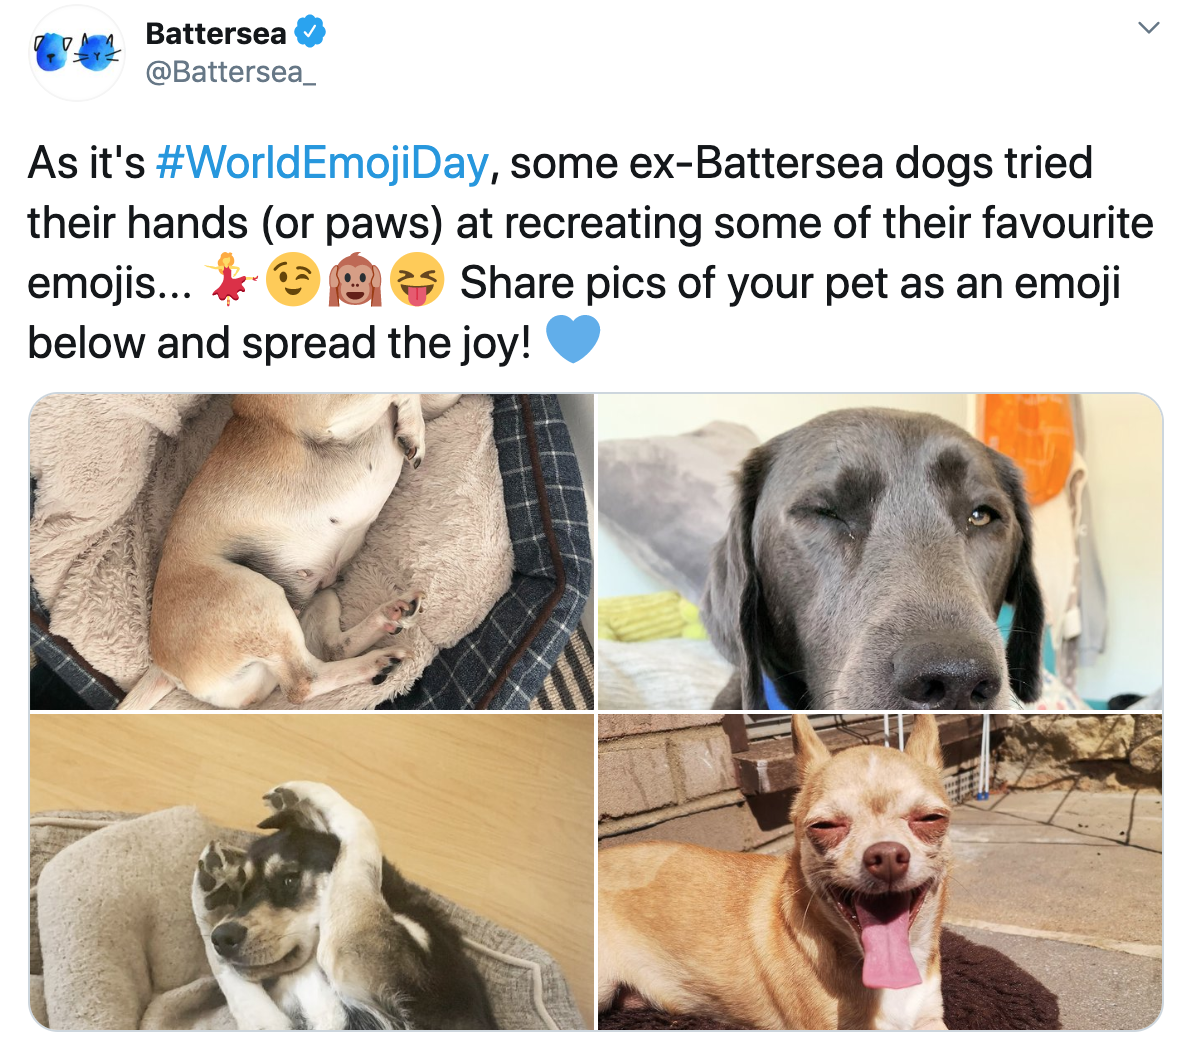 Four Battersea Dogs pulling emoji-expressions